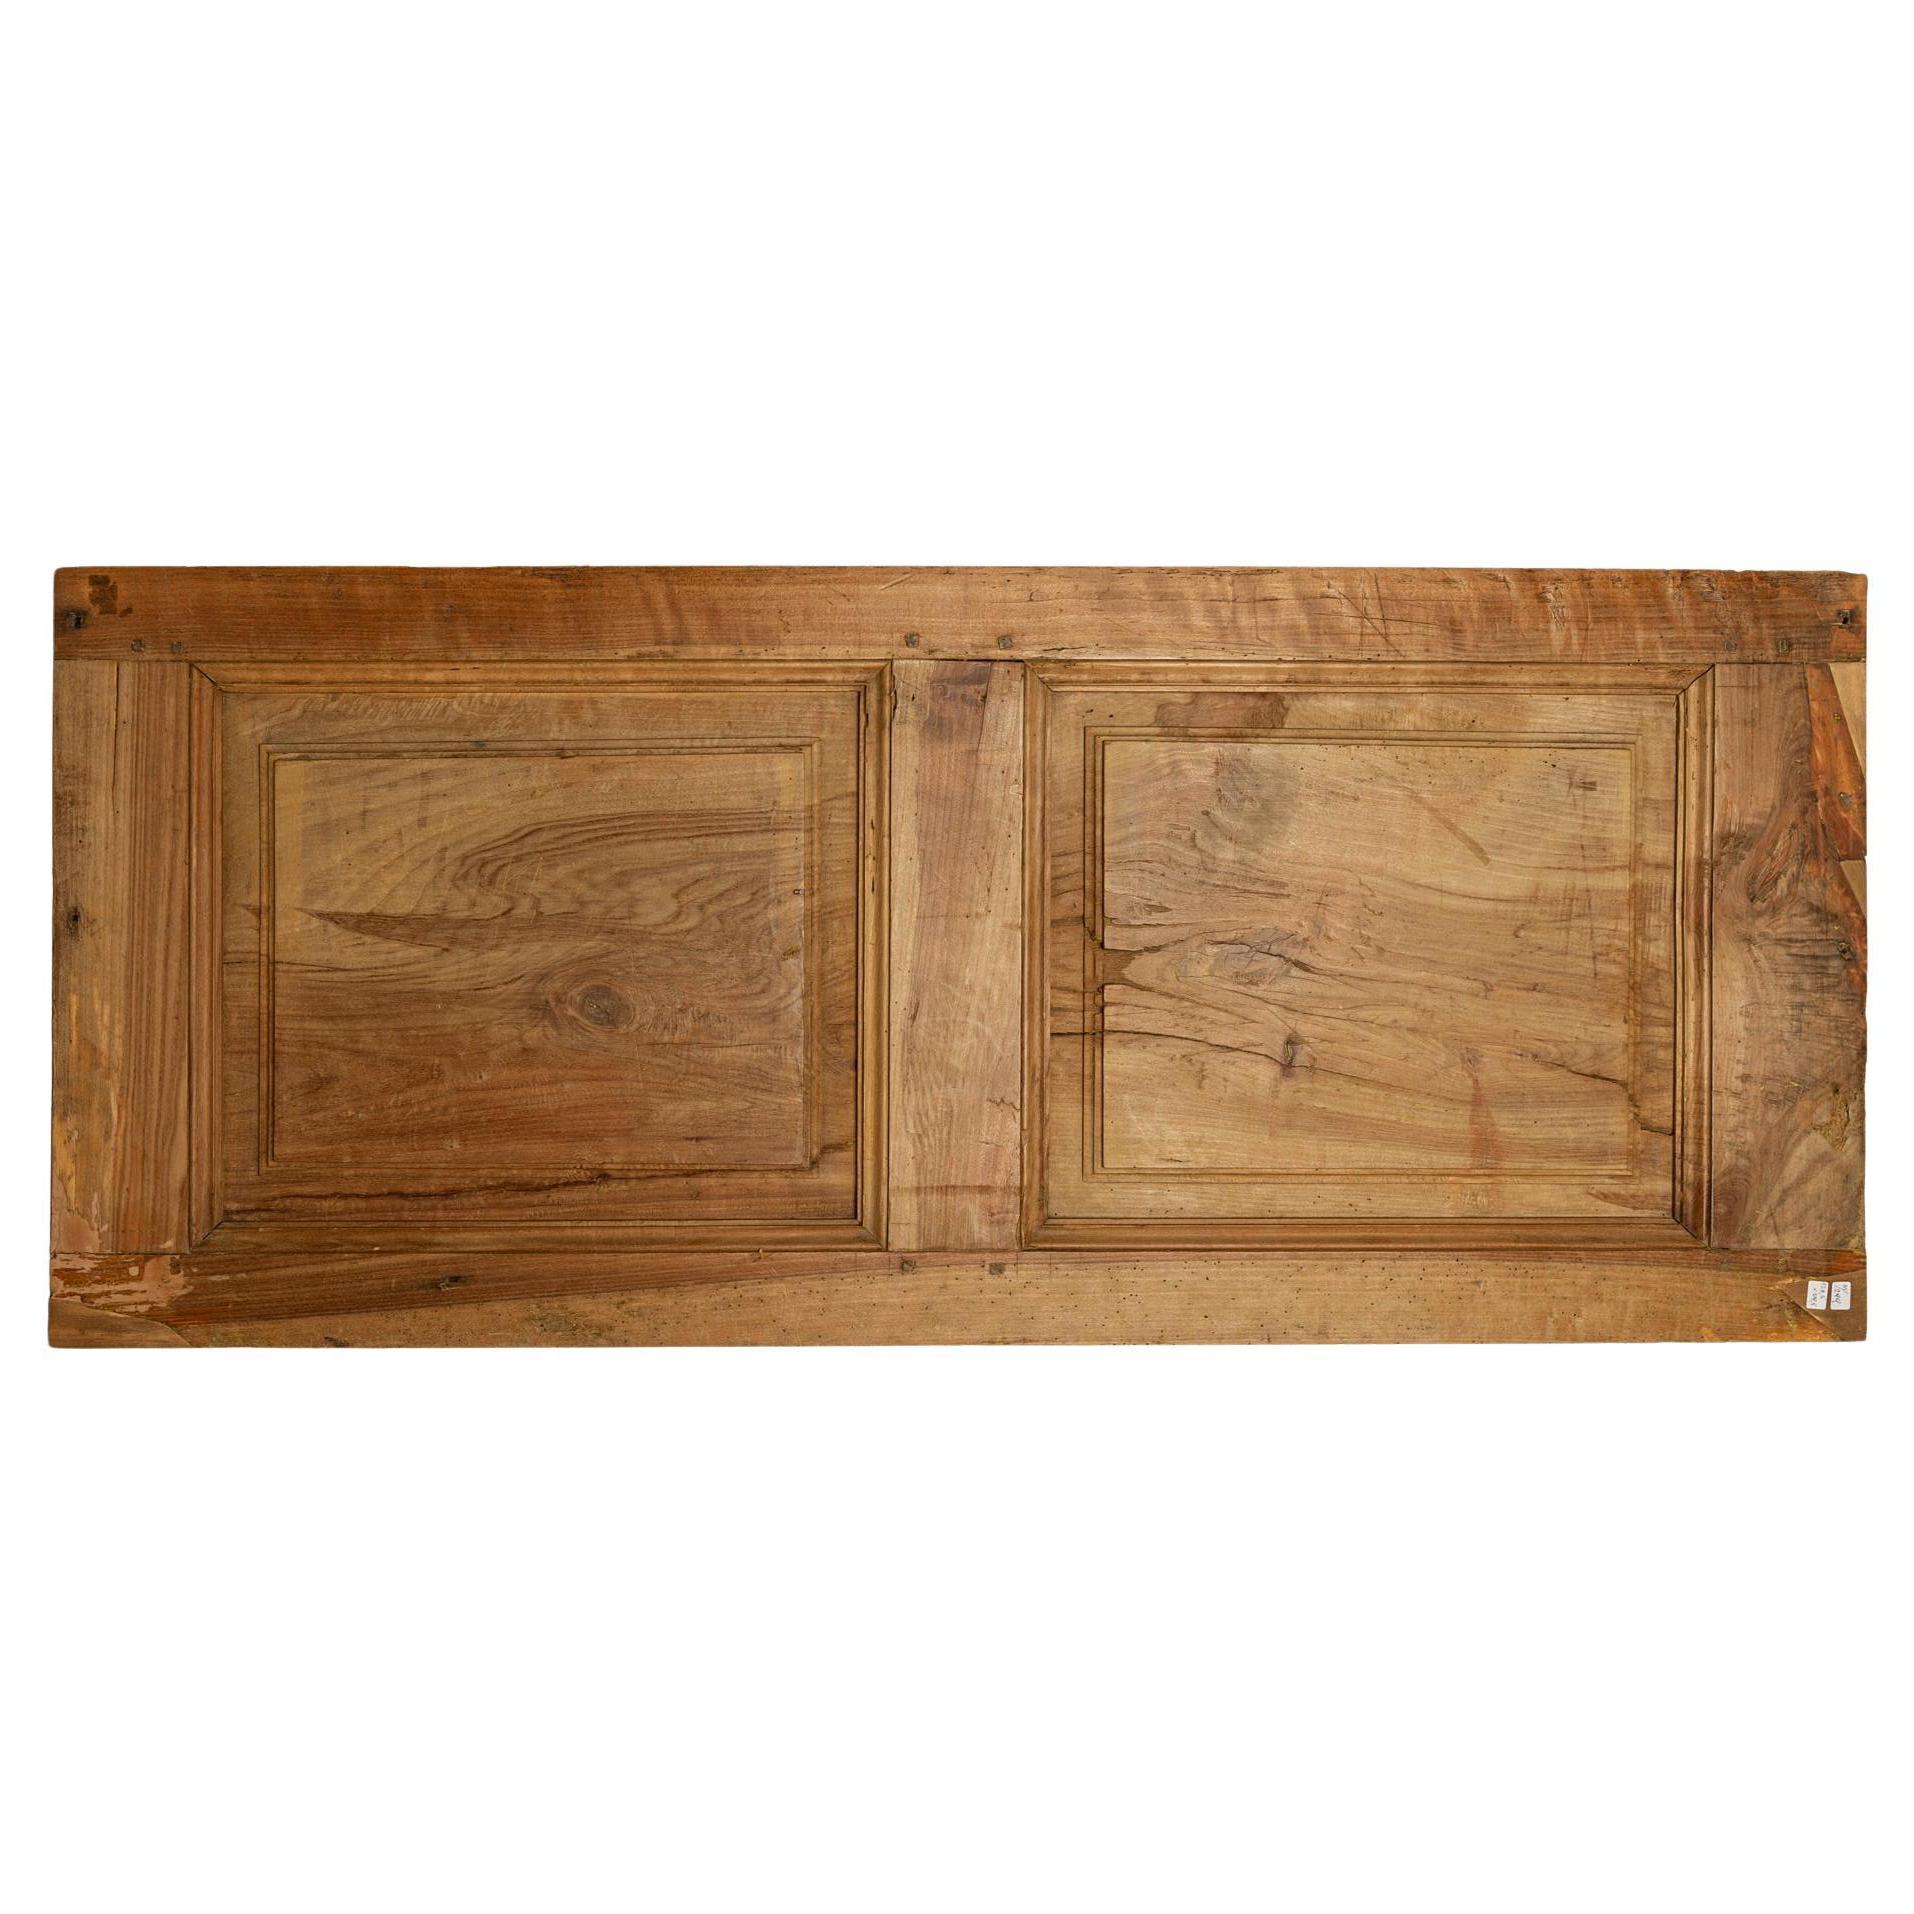 M/299 - Little ancient Italian door for rustic cabinet:  coming from the mountains of northern Italy.  Usable for a closet or as little bed headboard.
That's a good price for closing activities.